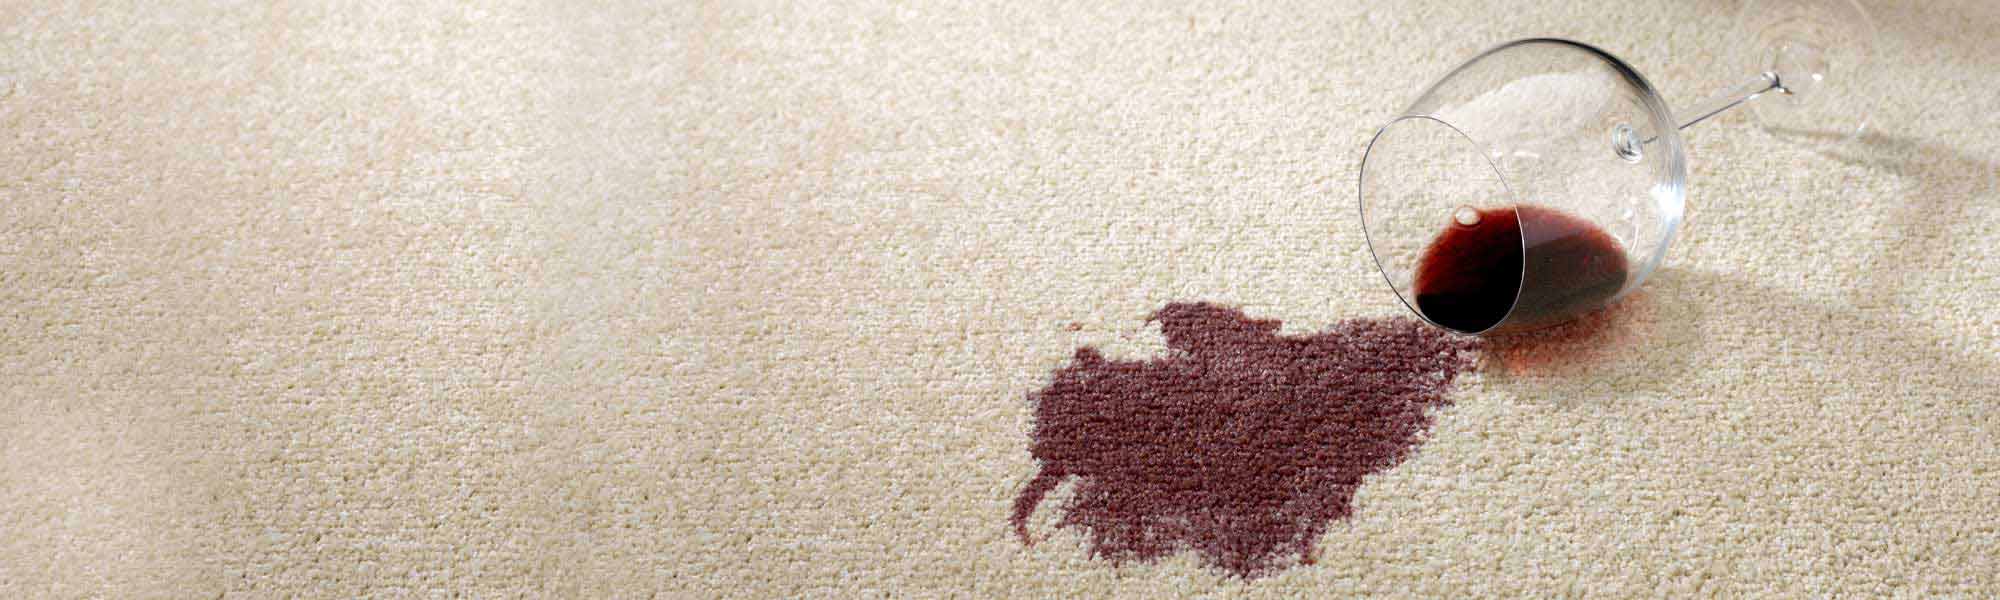 Professional Stain Removal Service by Chem-Dry Carpet Cleaning by Warren